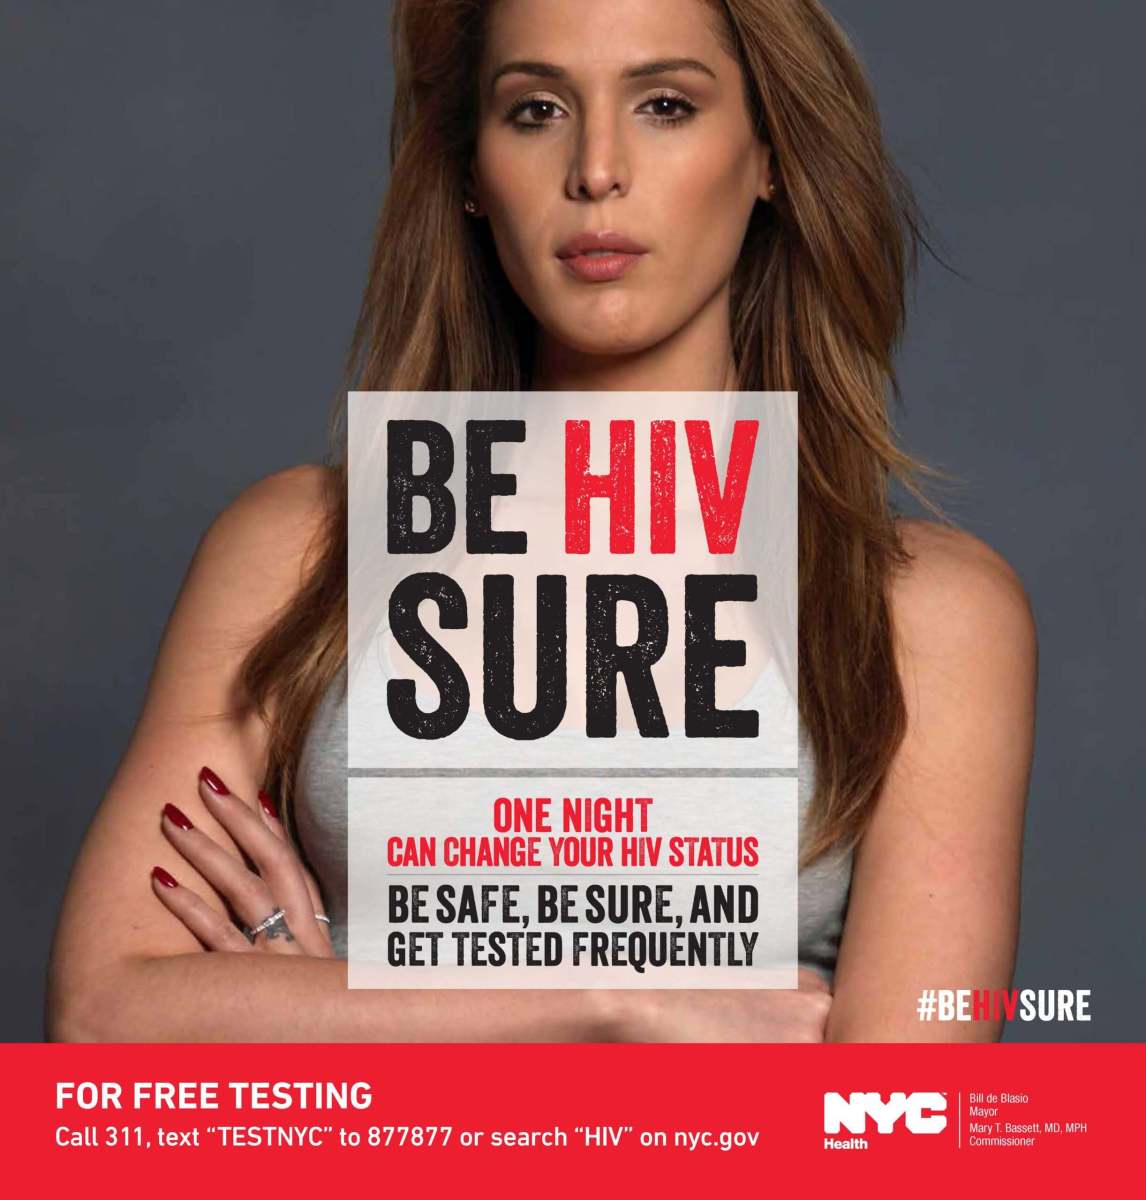 New HIV diagnoses continue drop in NYC